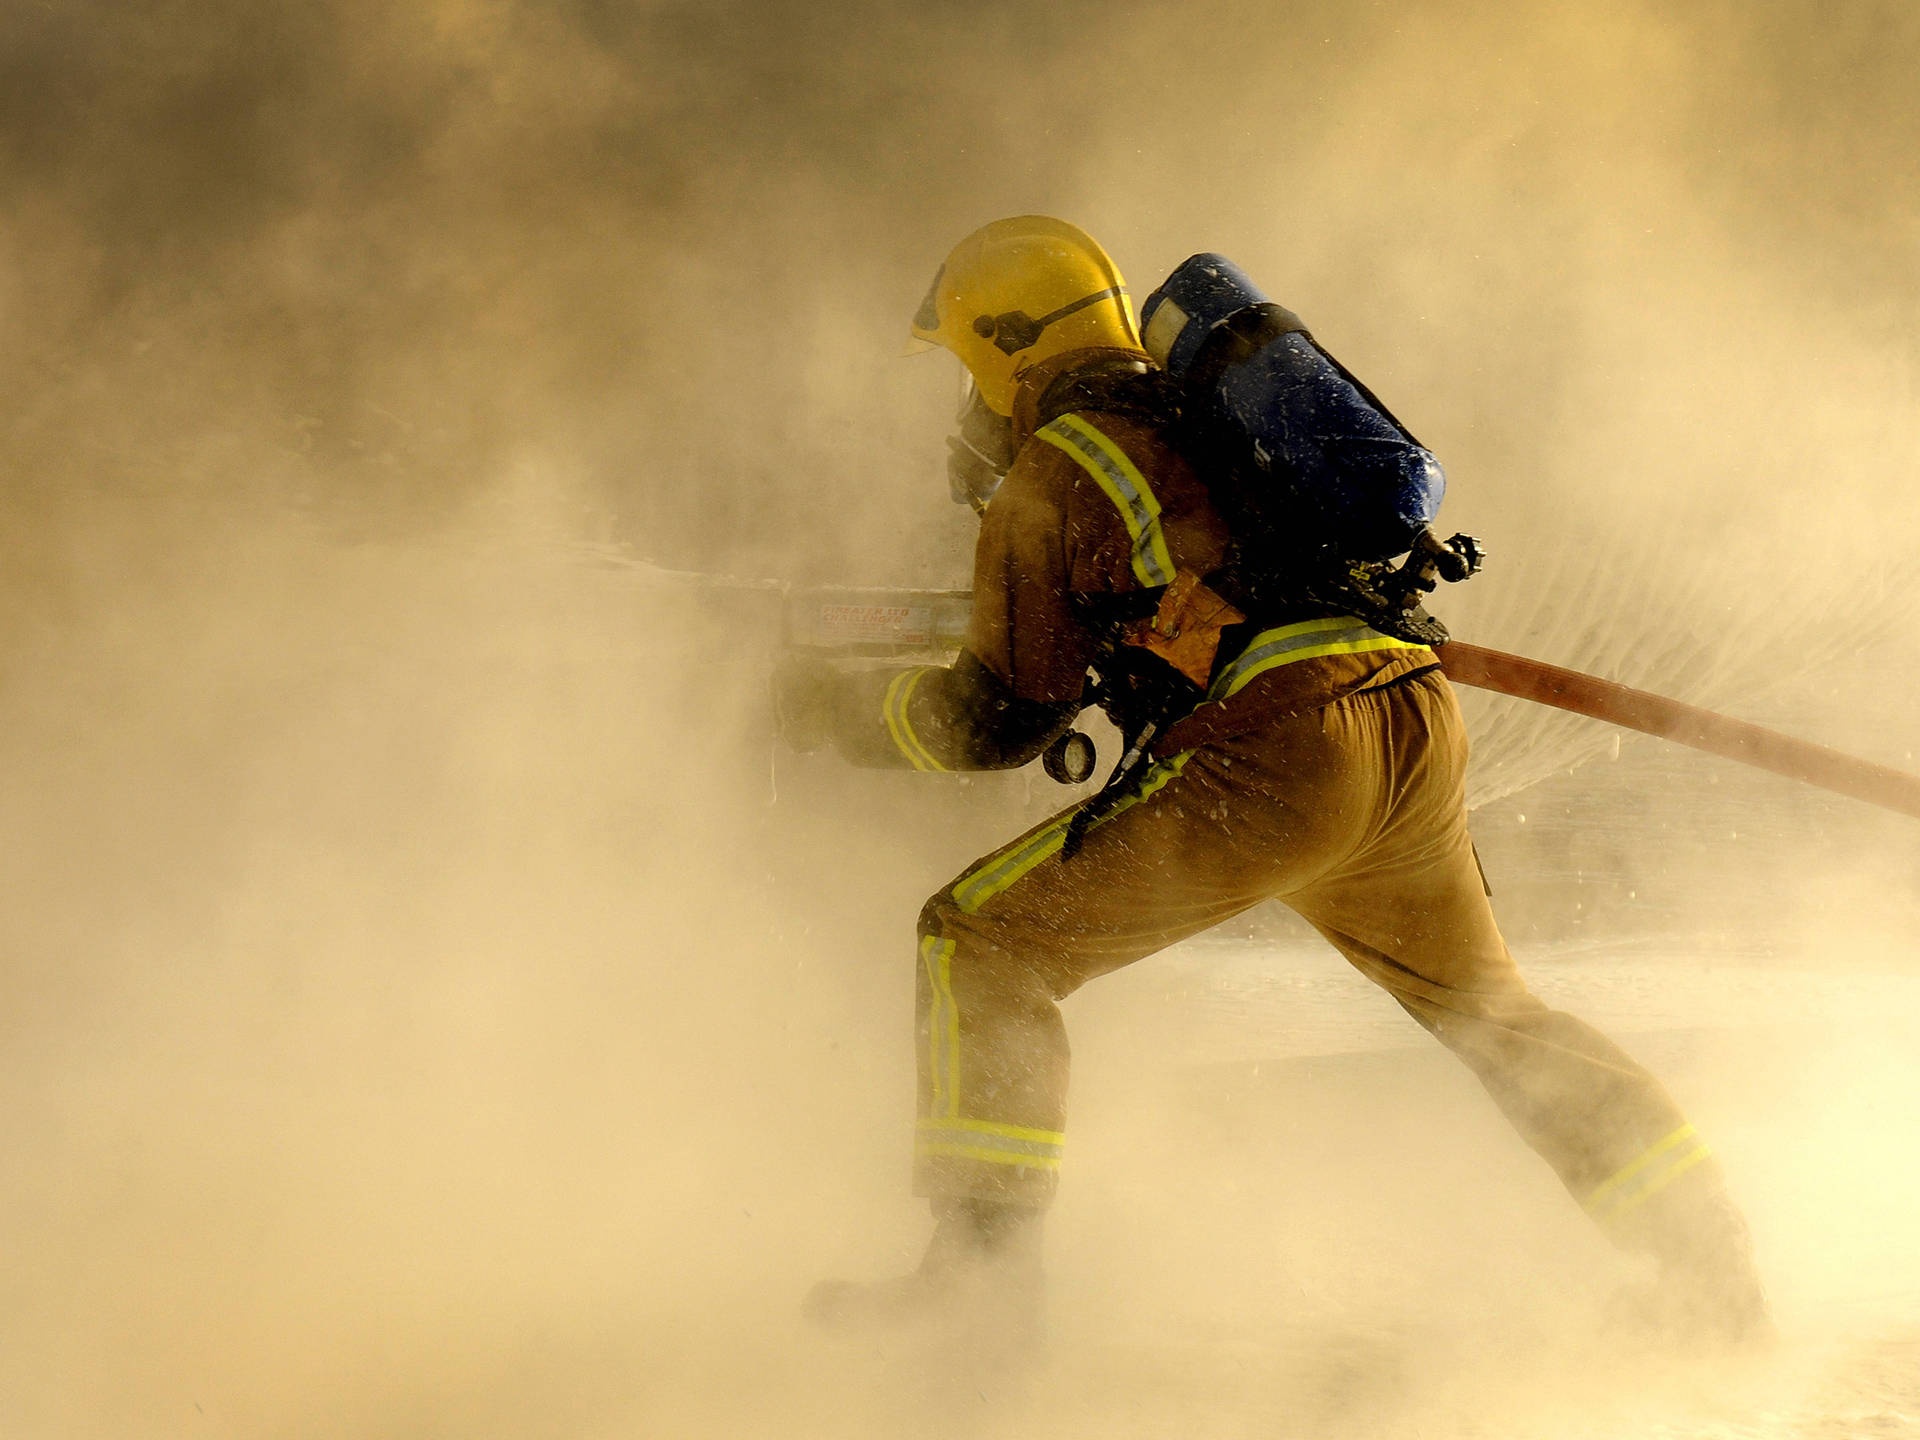 Firefighters In A Smoky Room Wallpaper